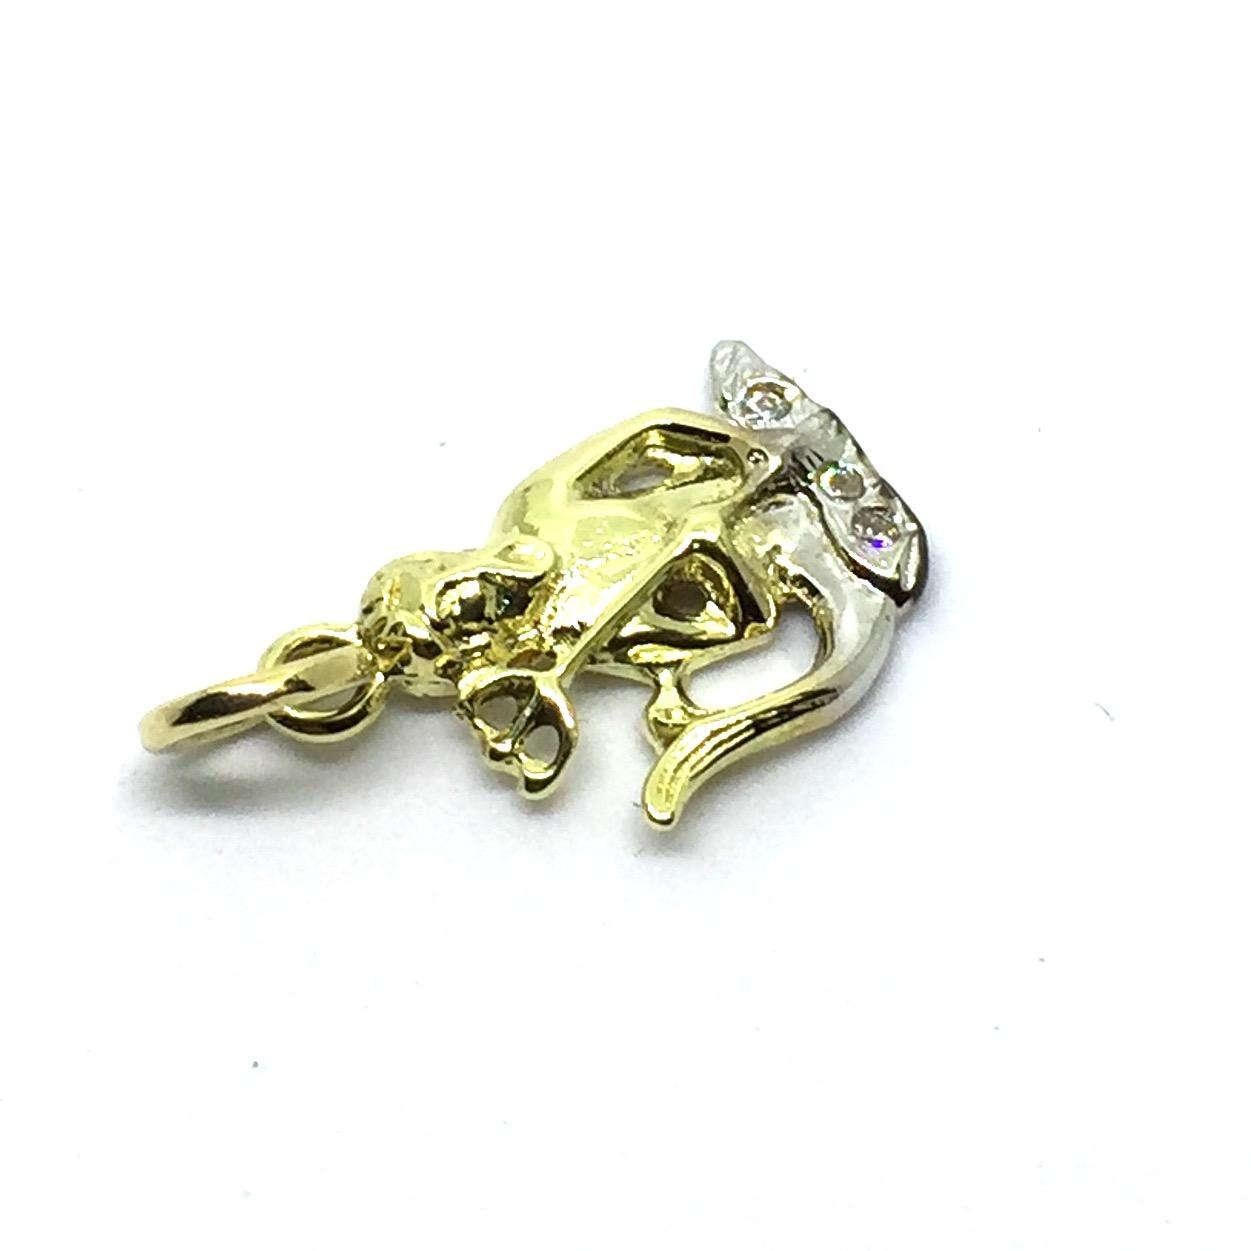 Vintage 14 Karat Yellow Gold Triton Charm

Triton is a mythological Greek god, the messenger of the sea. 

This charm features a merman holding his trident meticulously detailed in 14K gold. 

Size: 17 mm x 10 mm (actual charm) 

Weight: 0.7 dwt. /